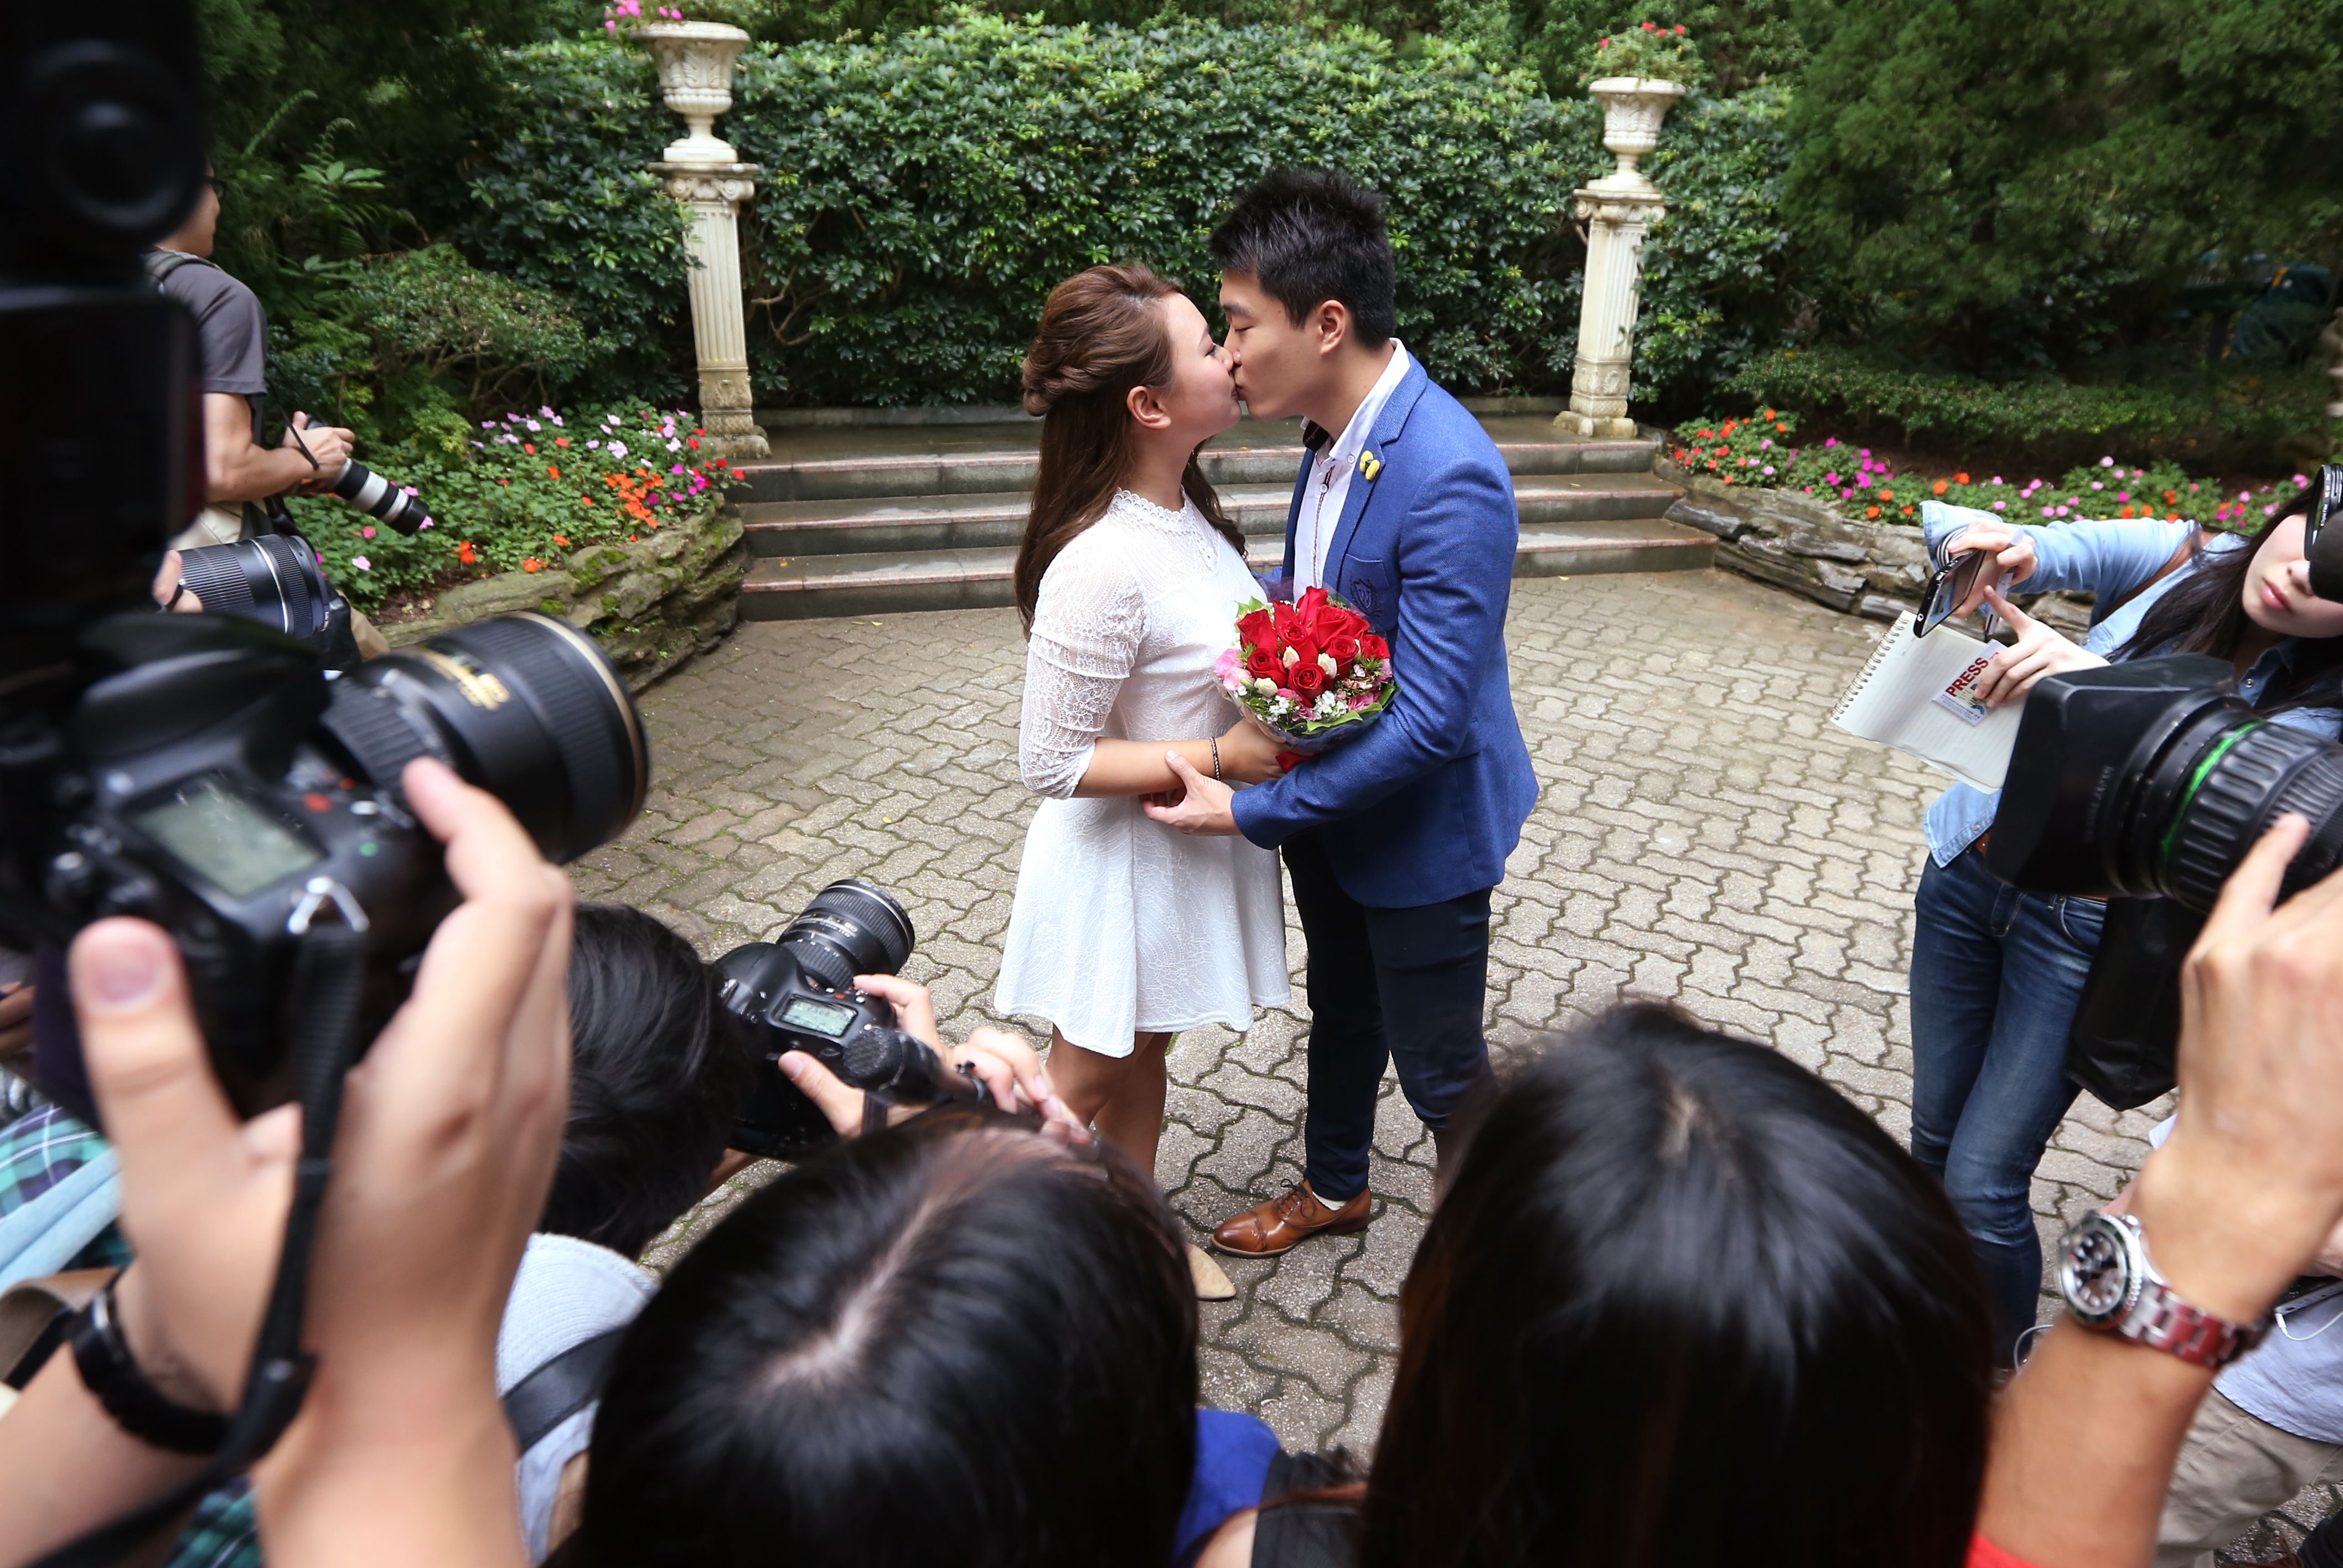 In this image, a man and a woman kiss in front of cameras in a park 